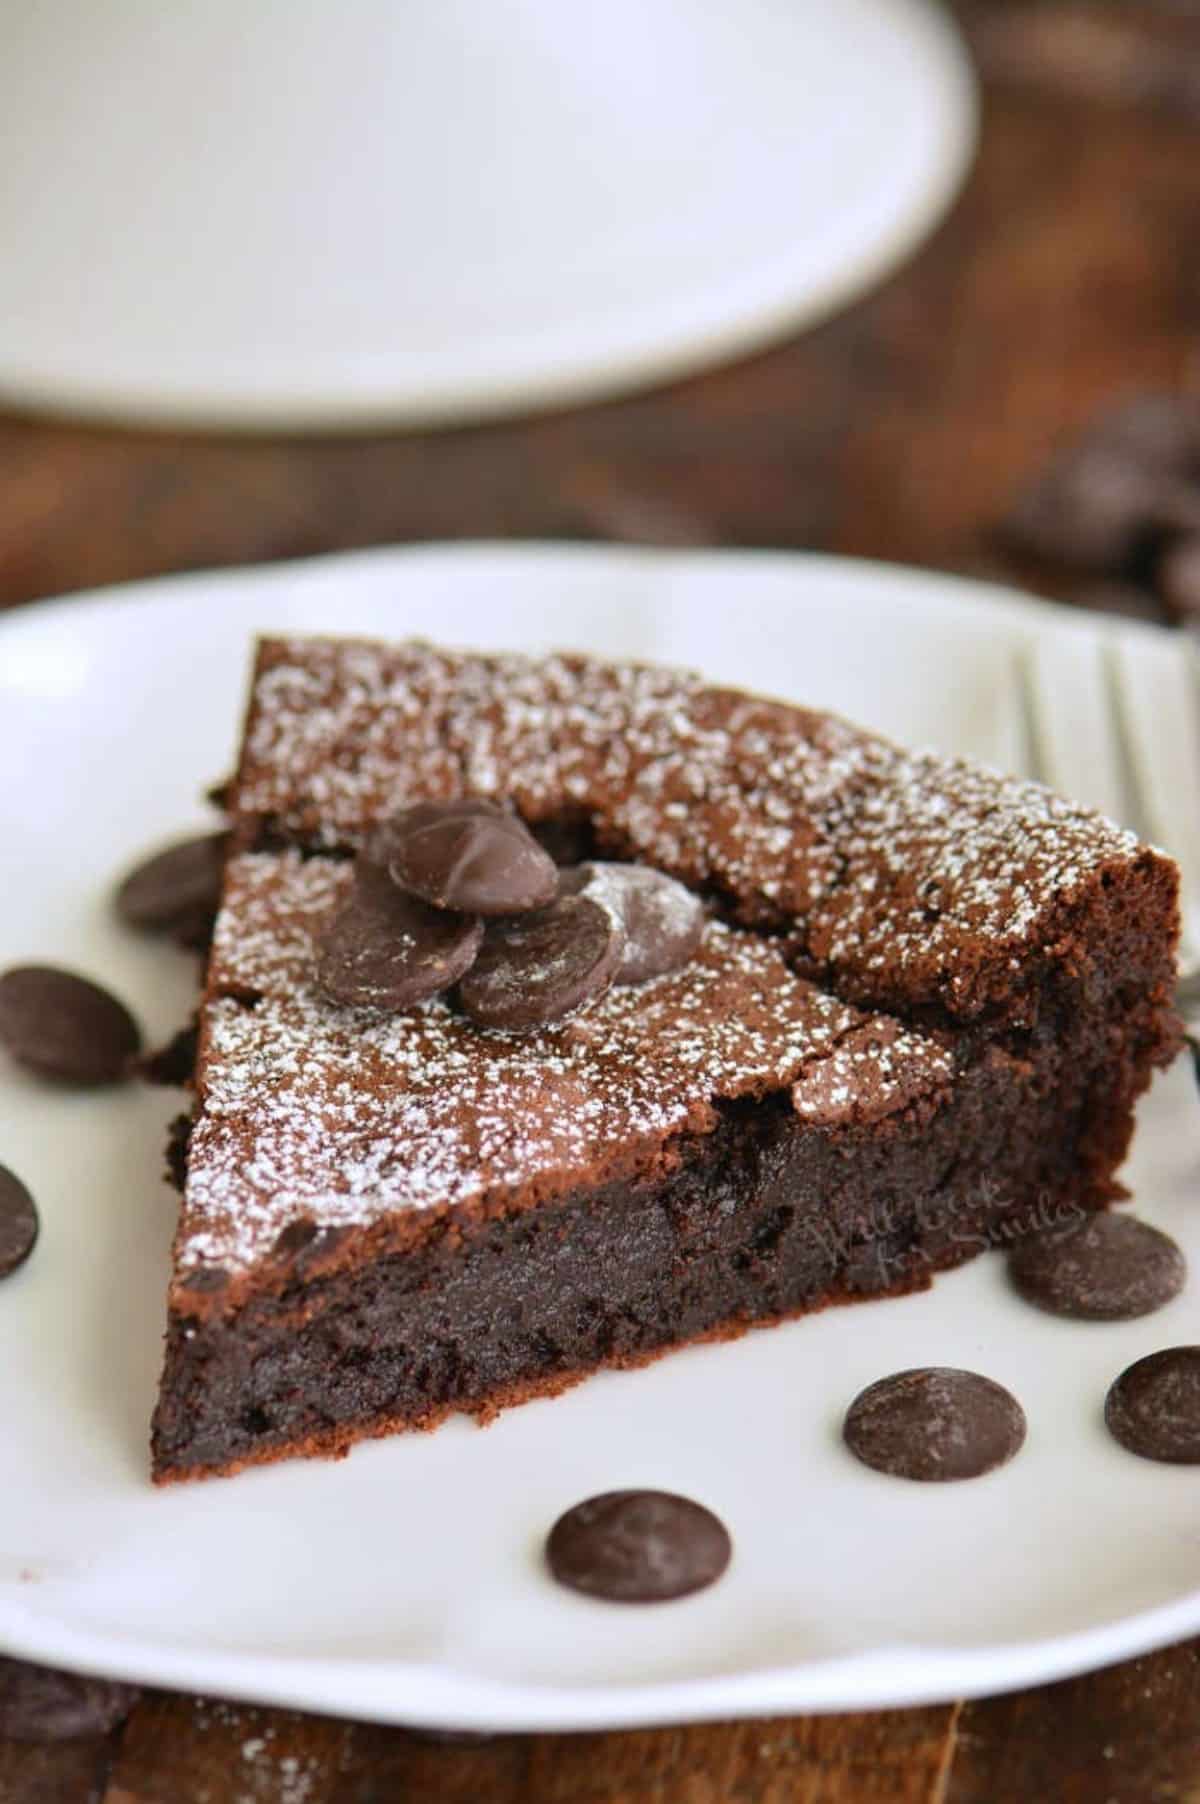 slice of flourless chocolate cake on the plate with some chocolate chips around.